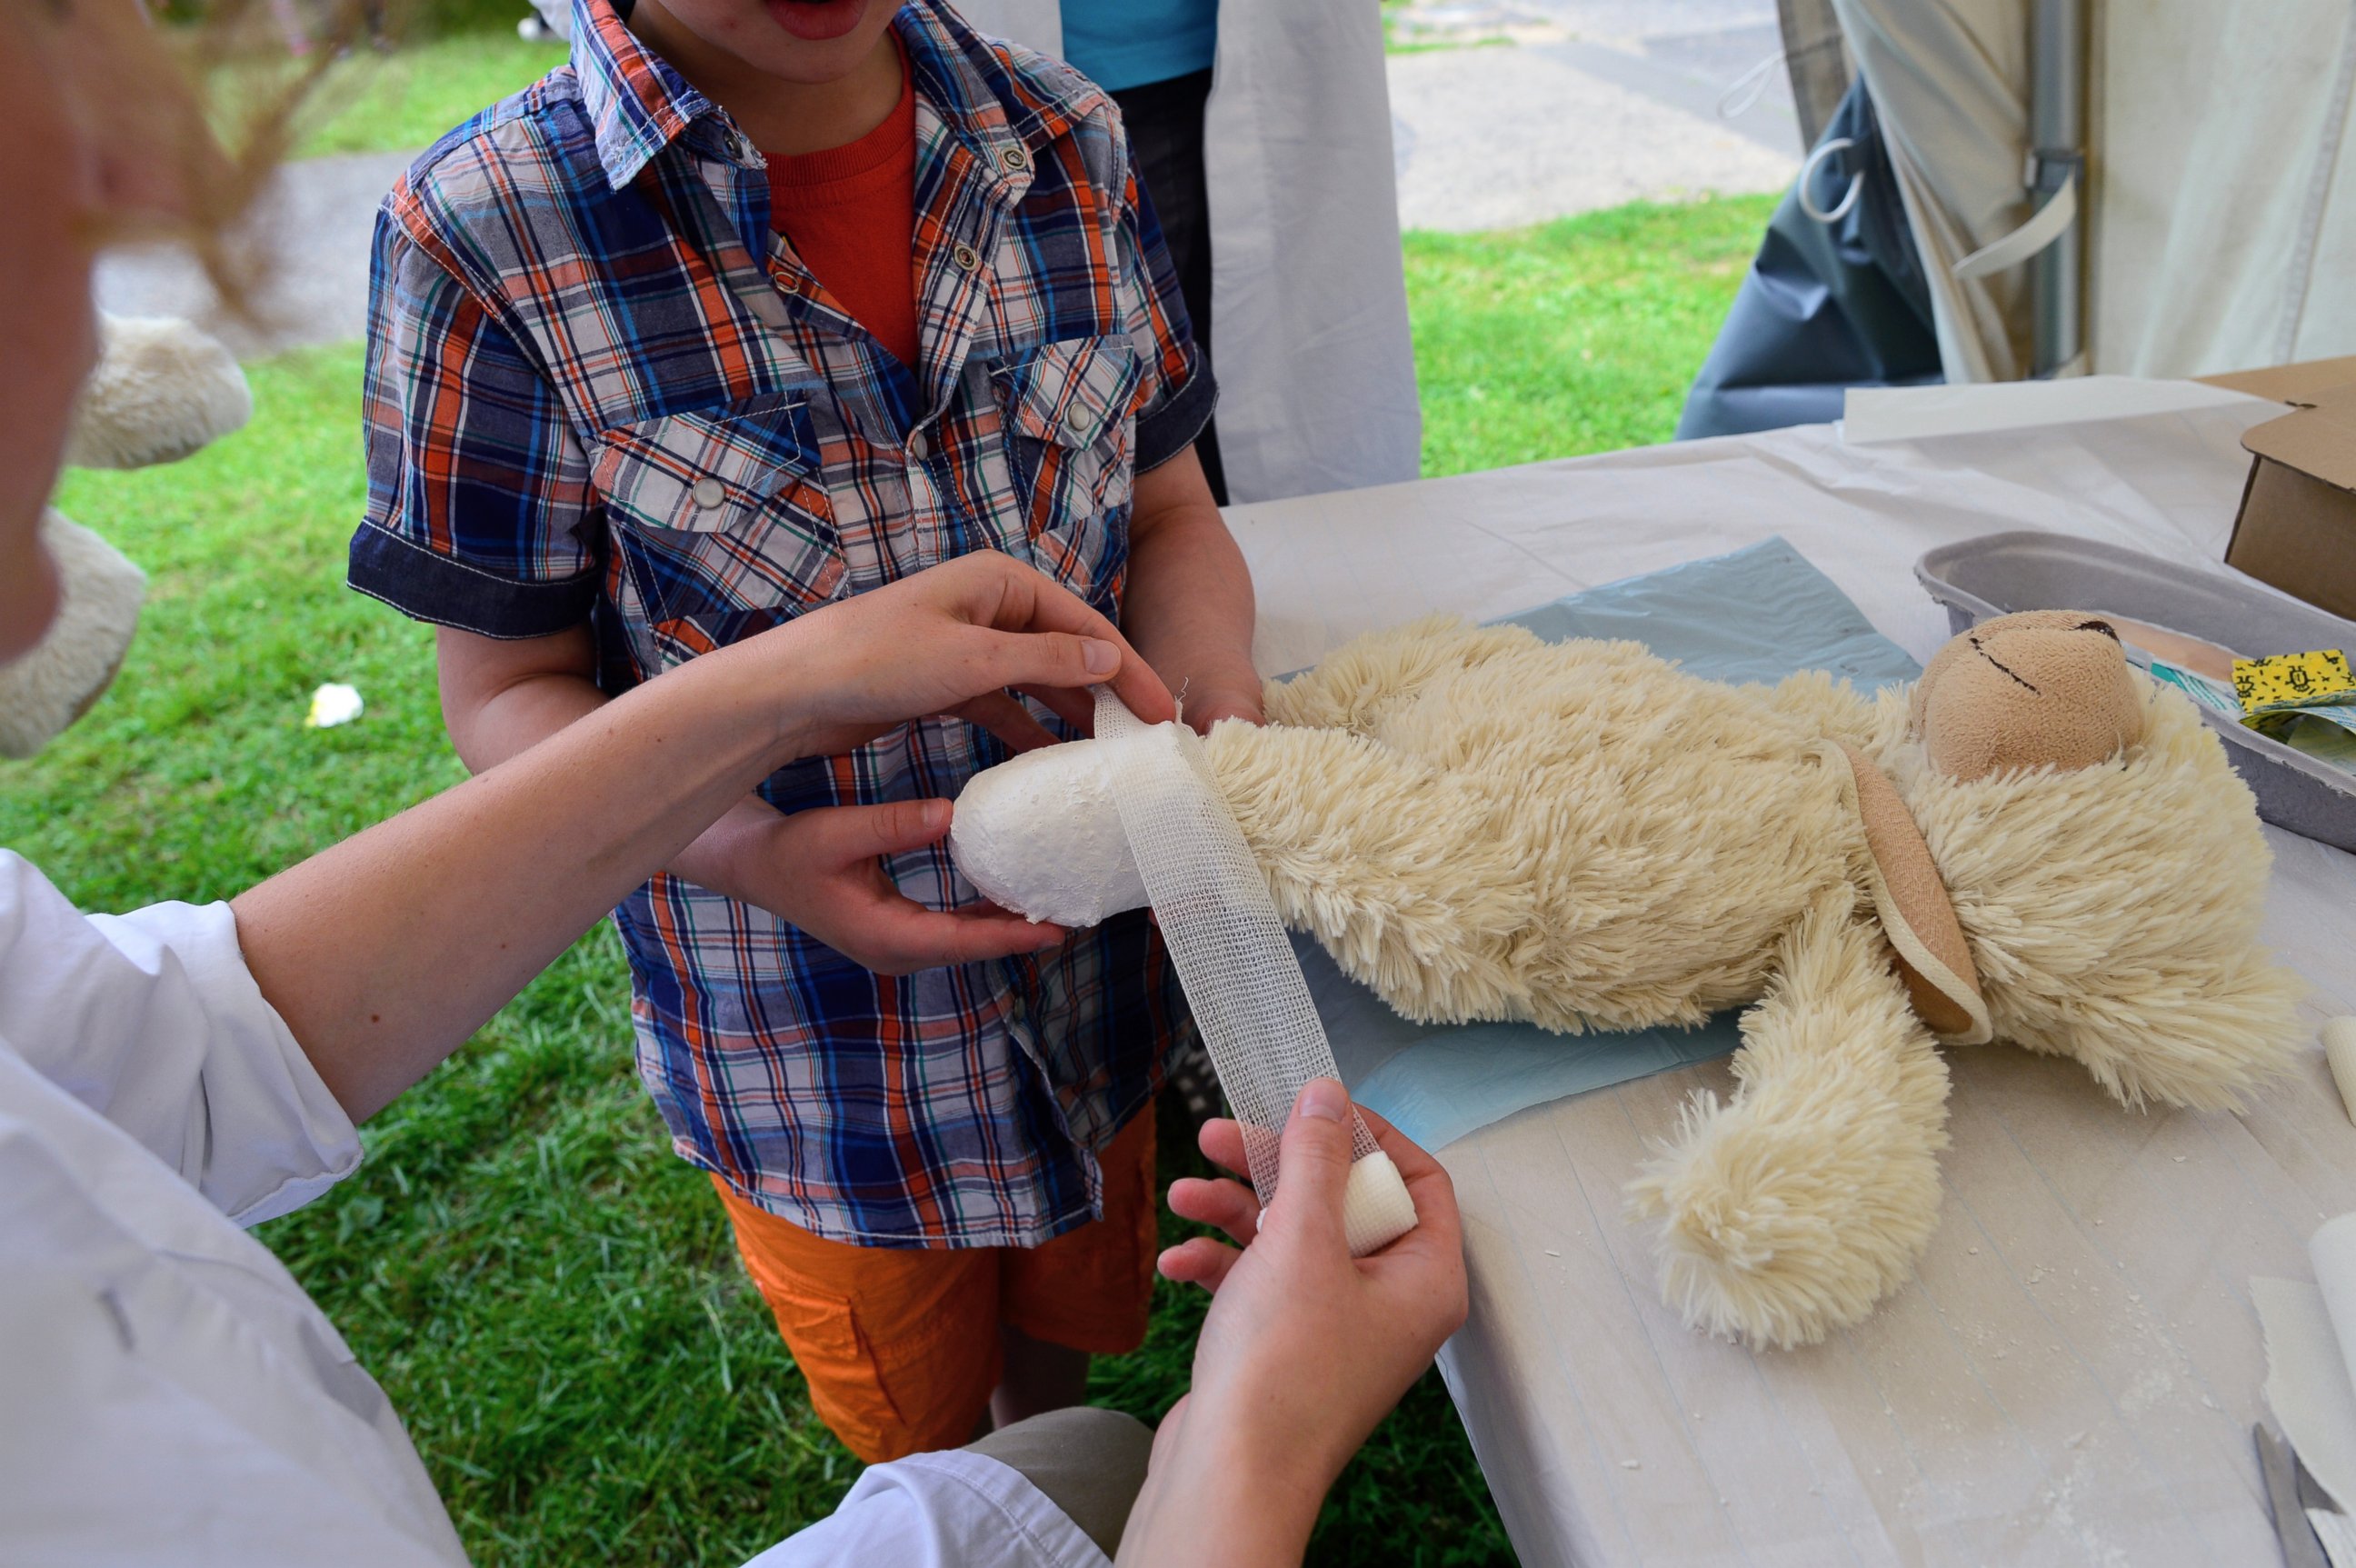 PHOTO: A teddy bear that belongs to a young boy gets a bandage at the "Teddy Clinic'' on June 4, 2014 in Giessen, Germany. 